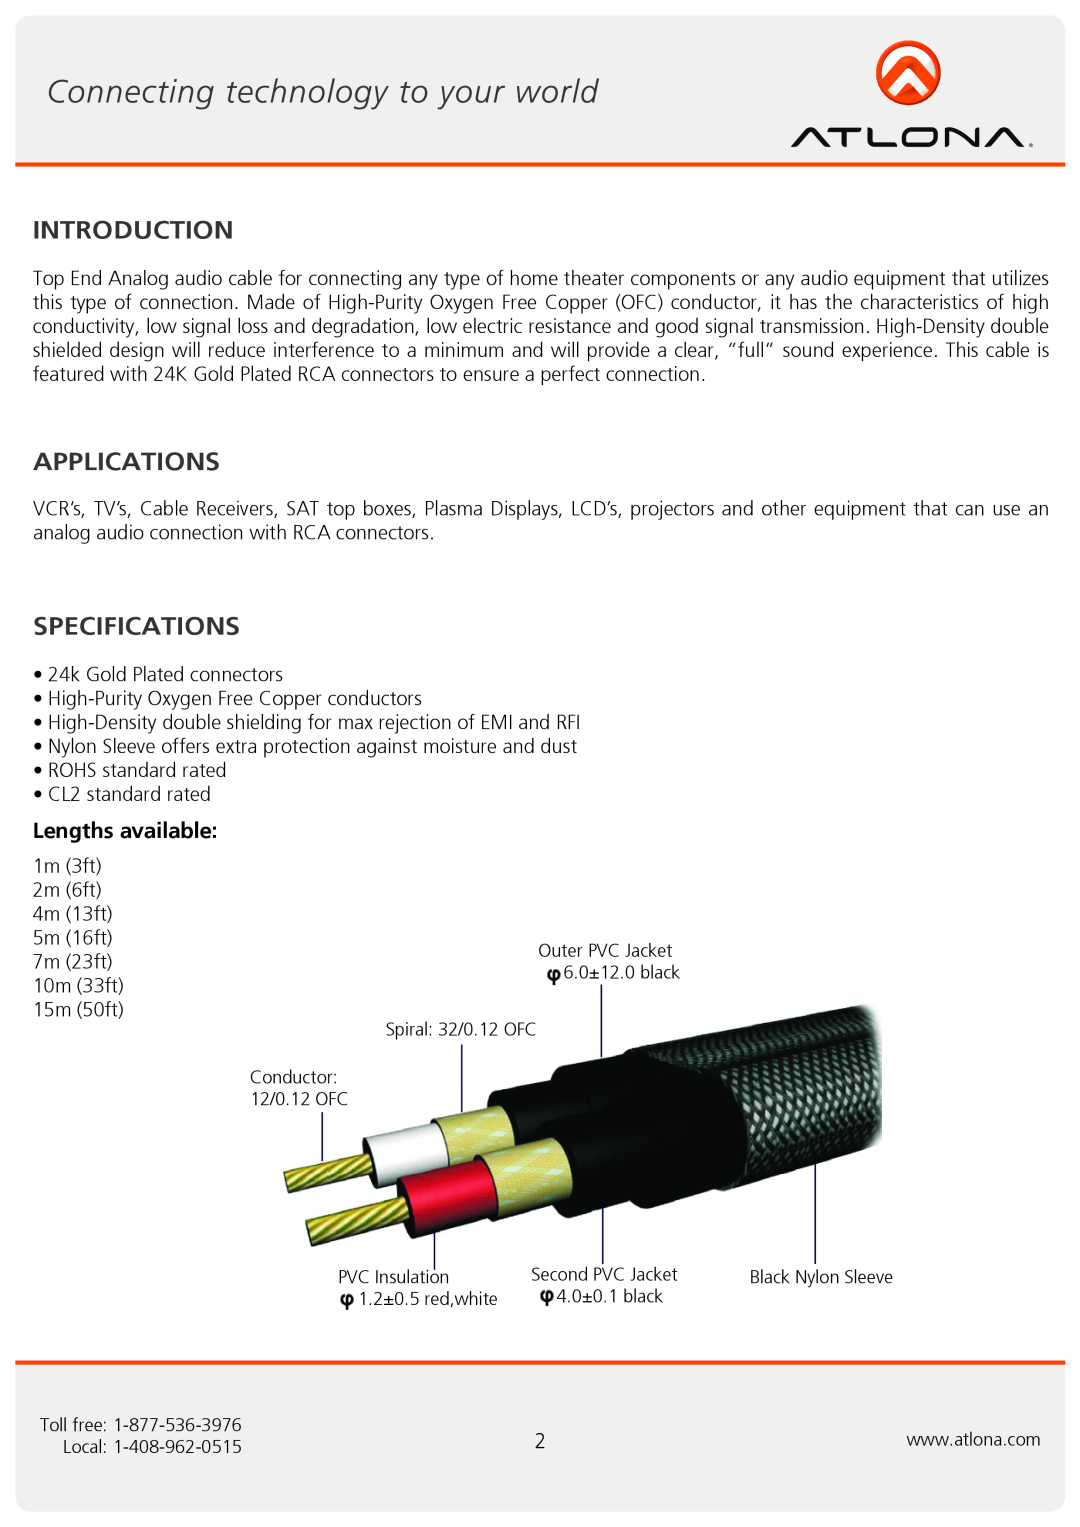 Atlona AT22080 user manual Introduction, Applications, Specifications, Lengths available 